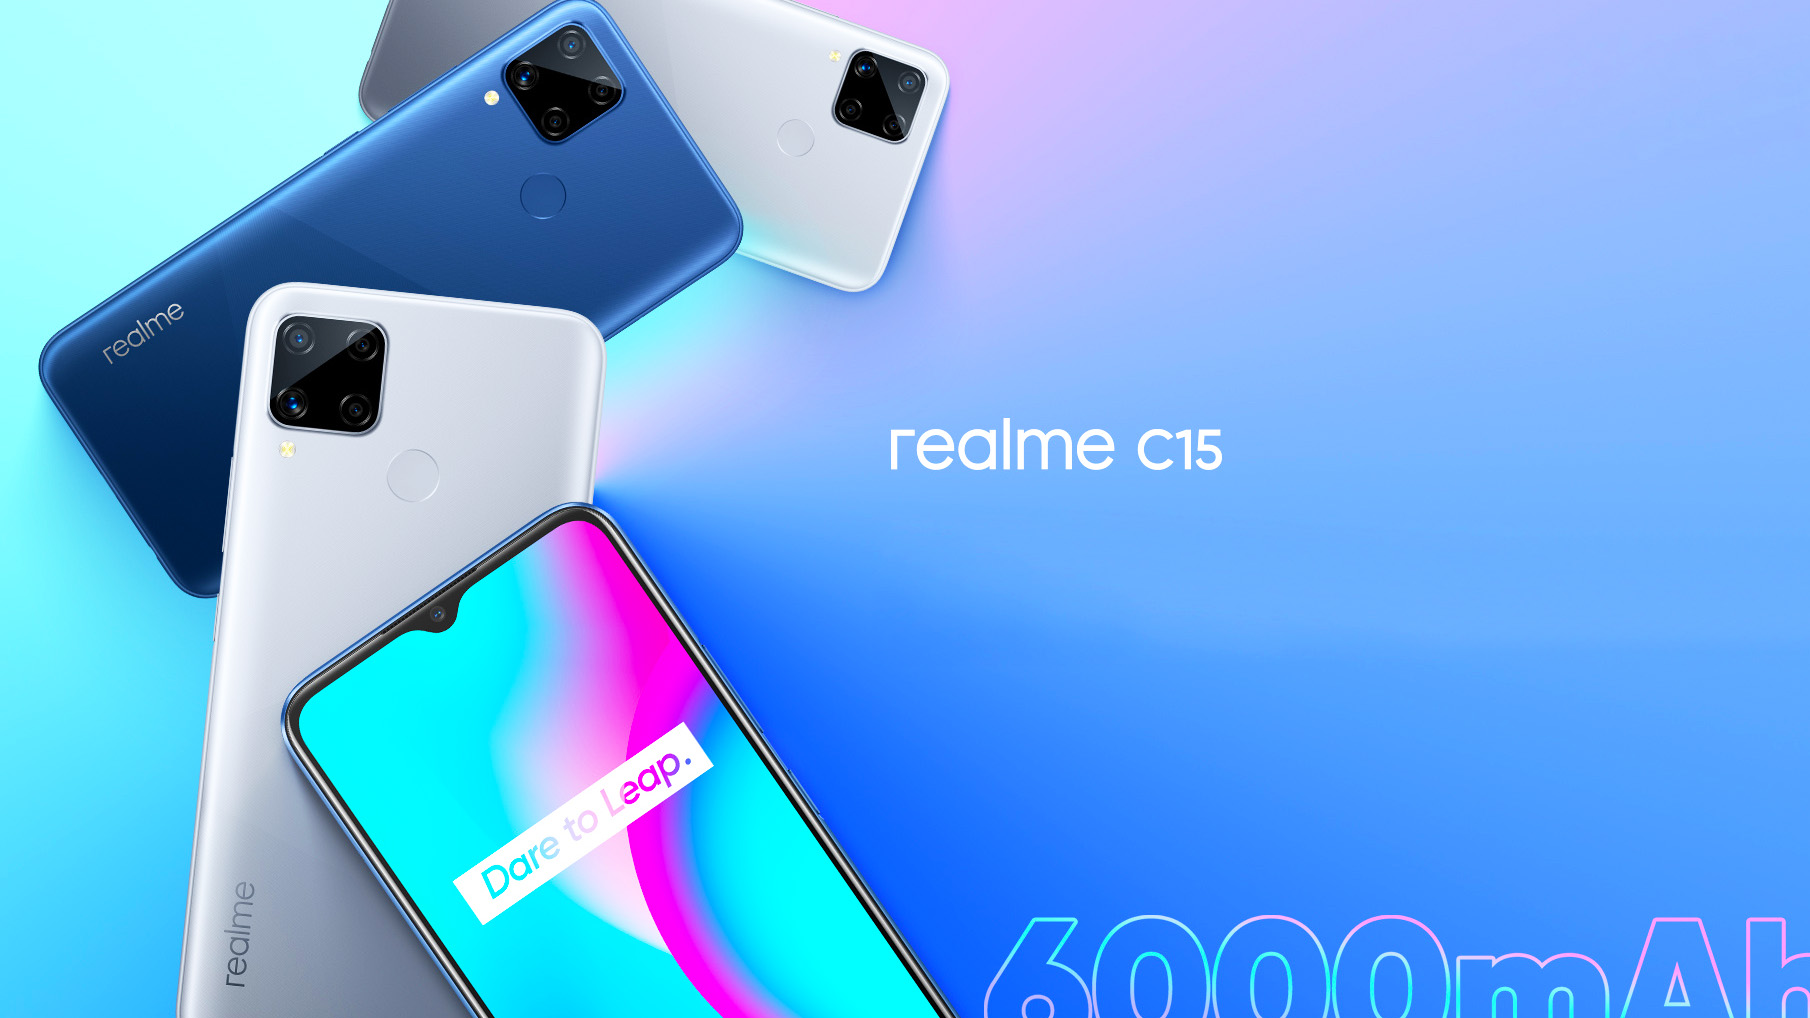 Realme C15 goes Official with Helio G35